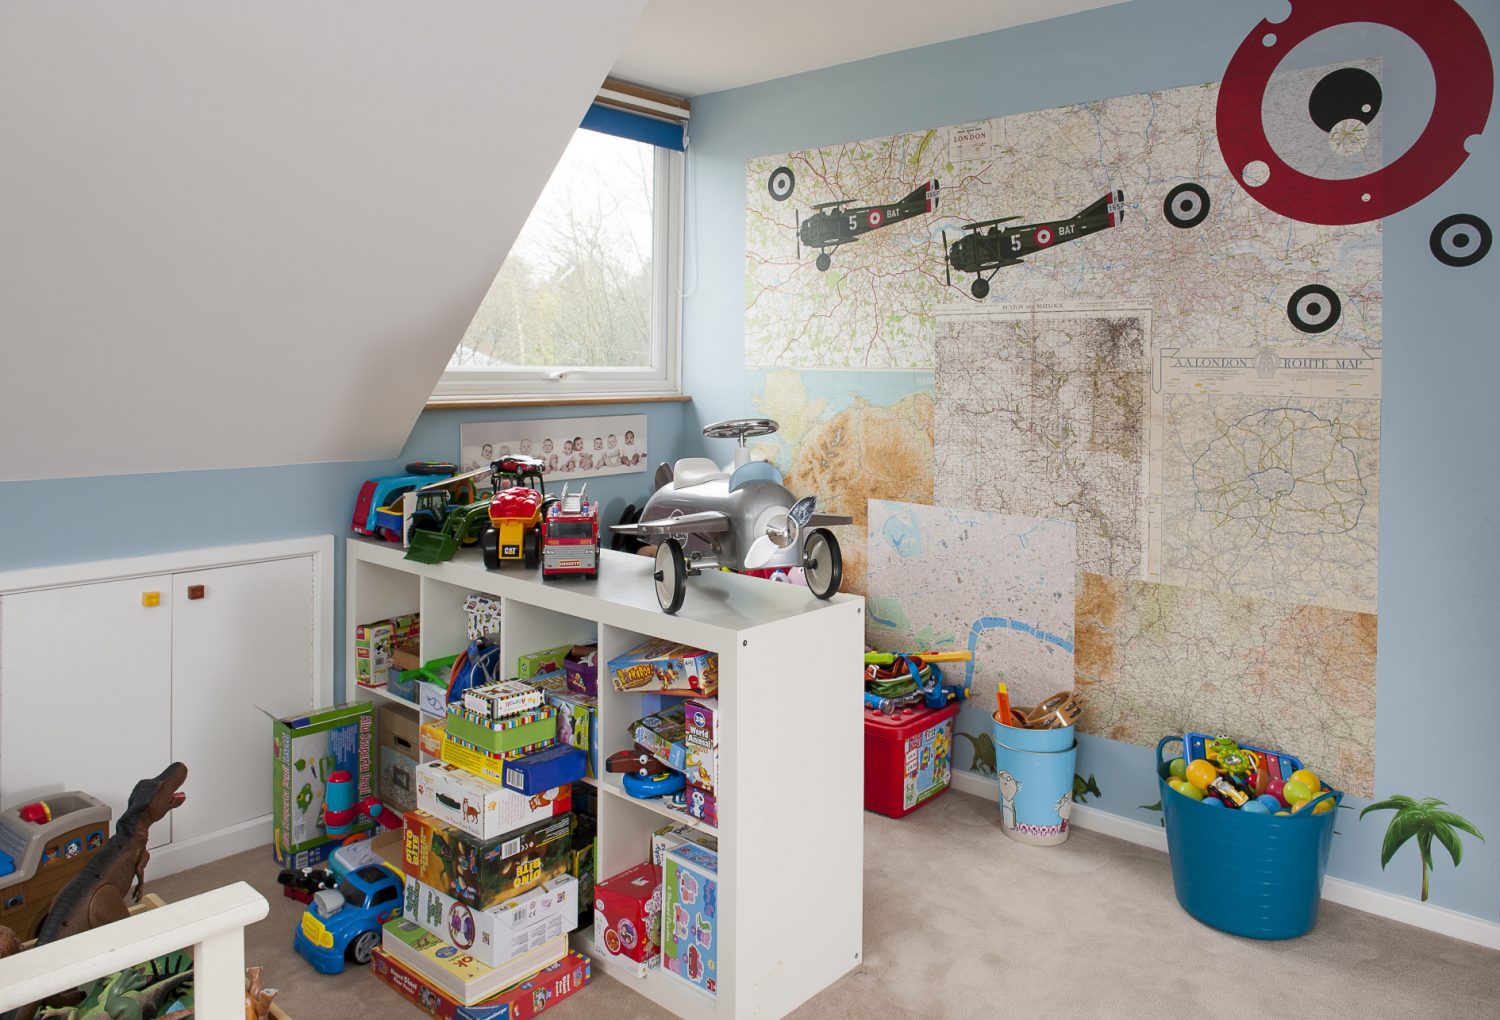 Son William’s room features a wall that’s papered in old maps, sourced by Sandra from antiques shops and fairs